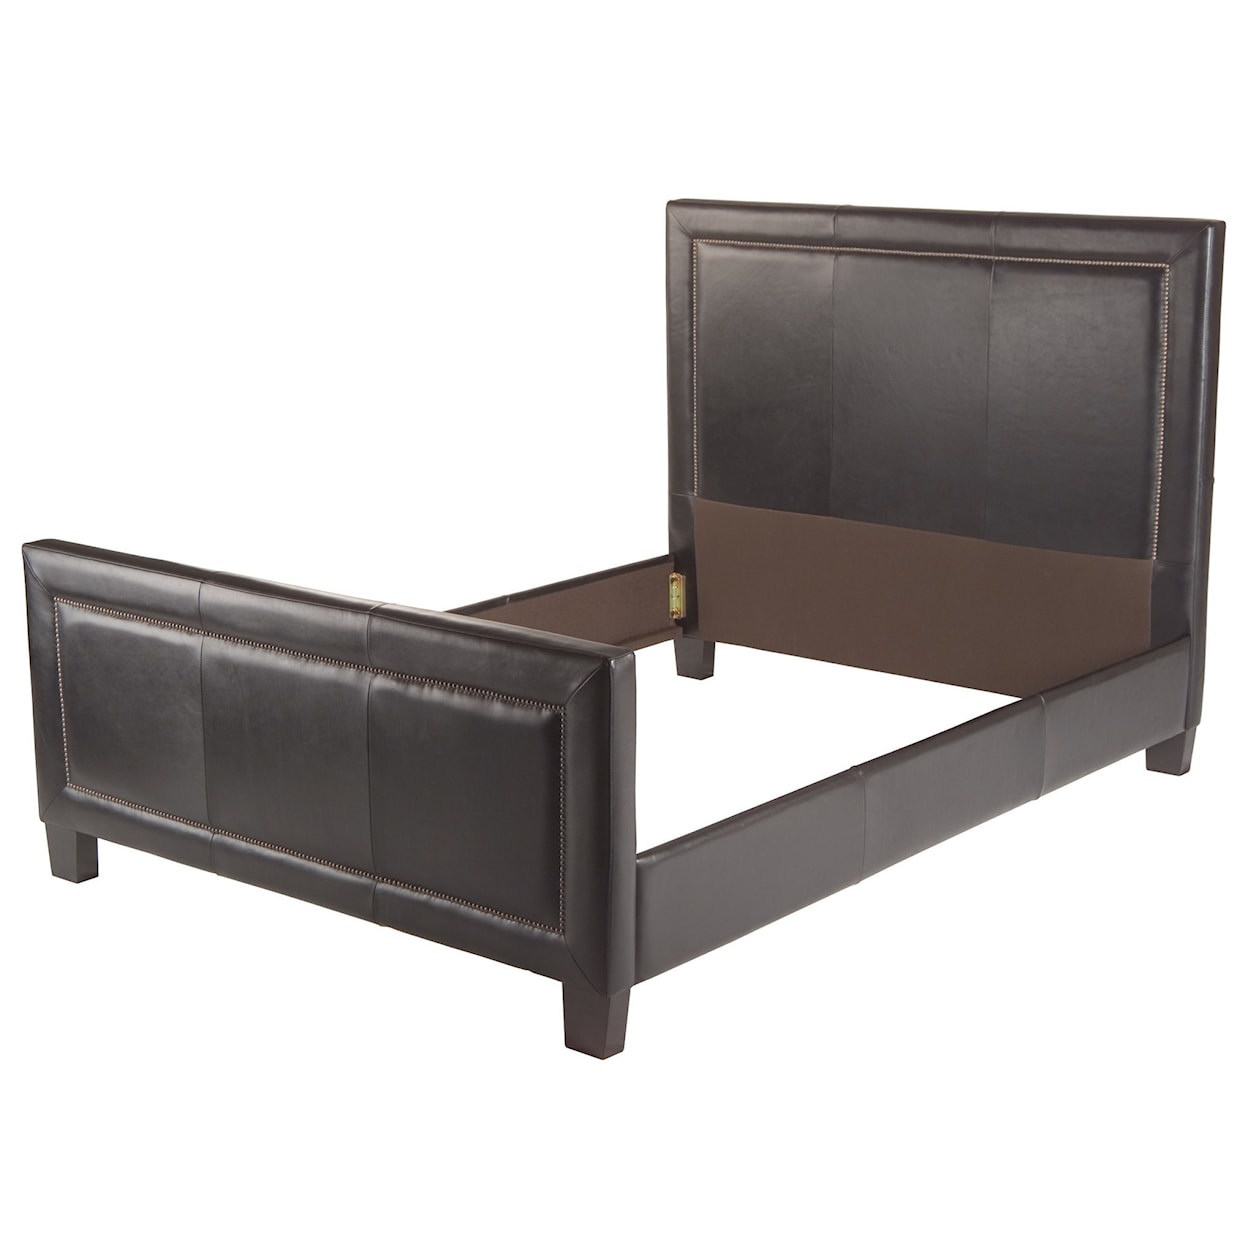 American Leather Copeland Upholstered Twin Bed